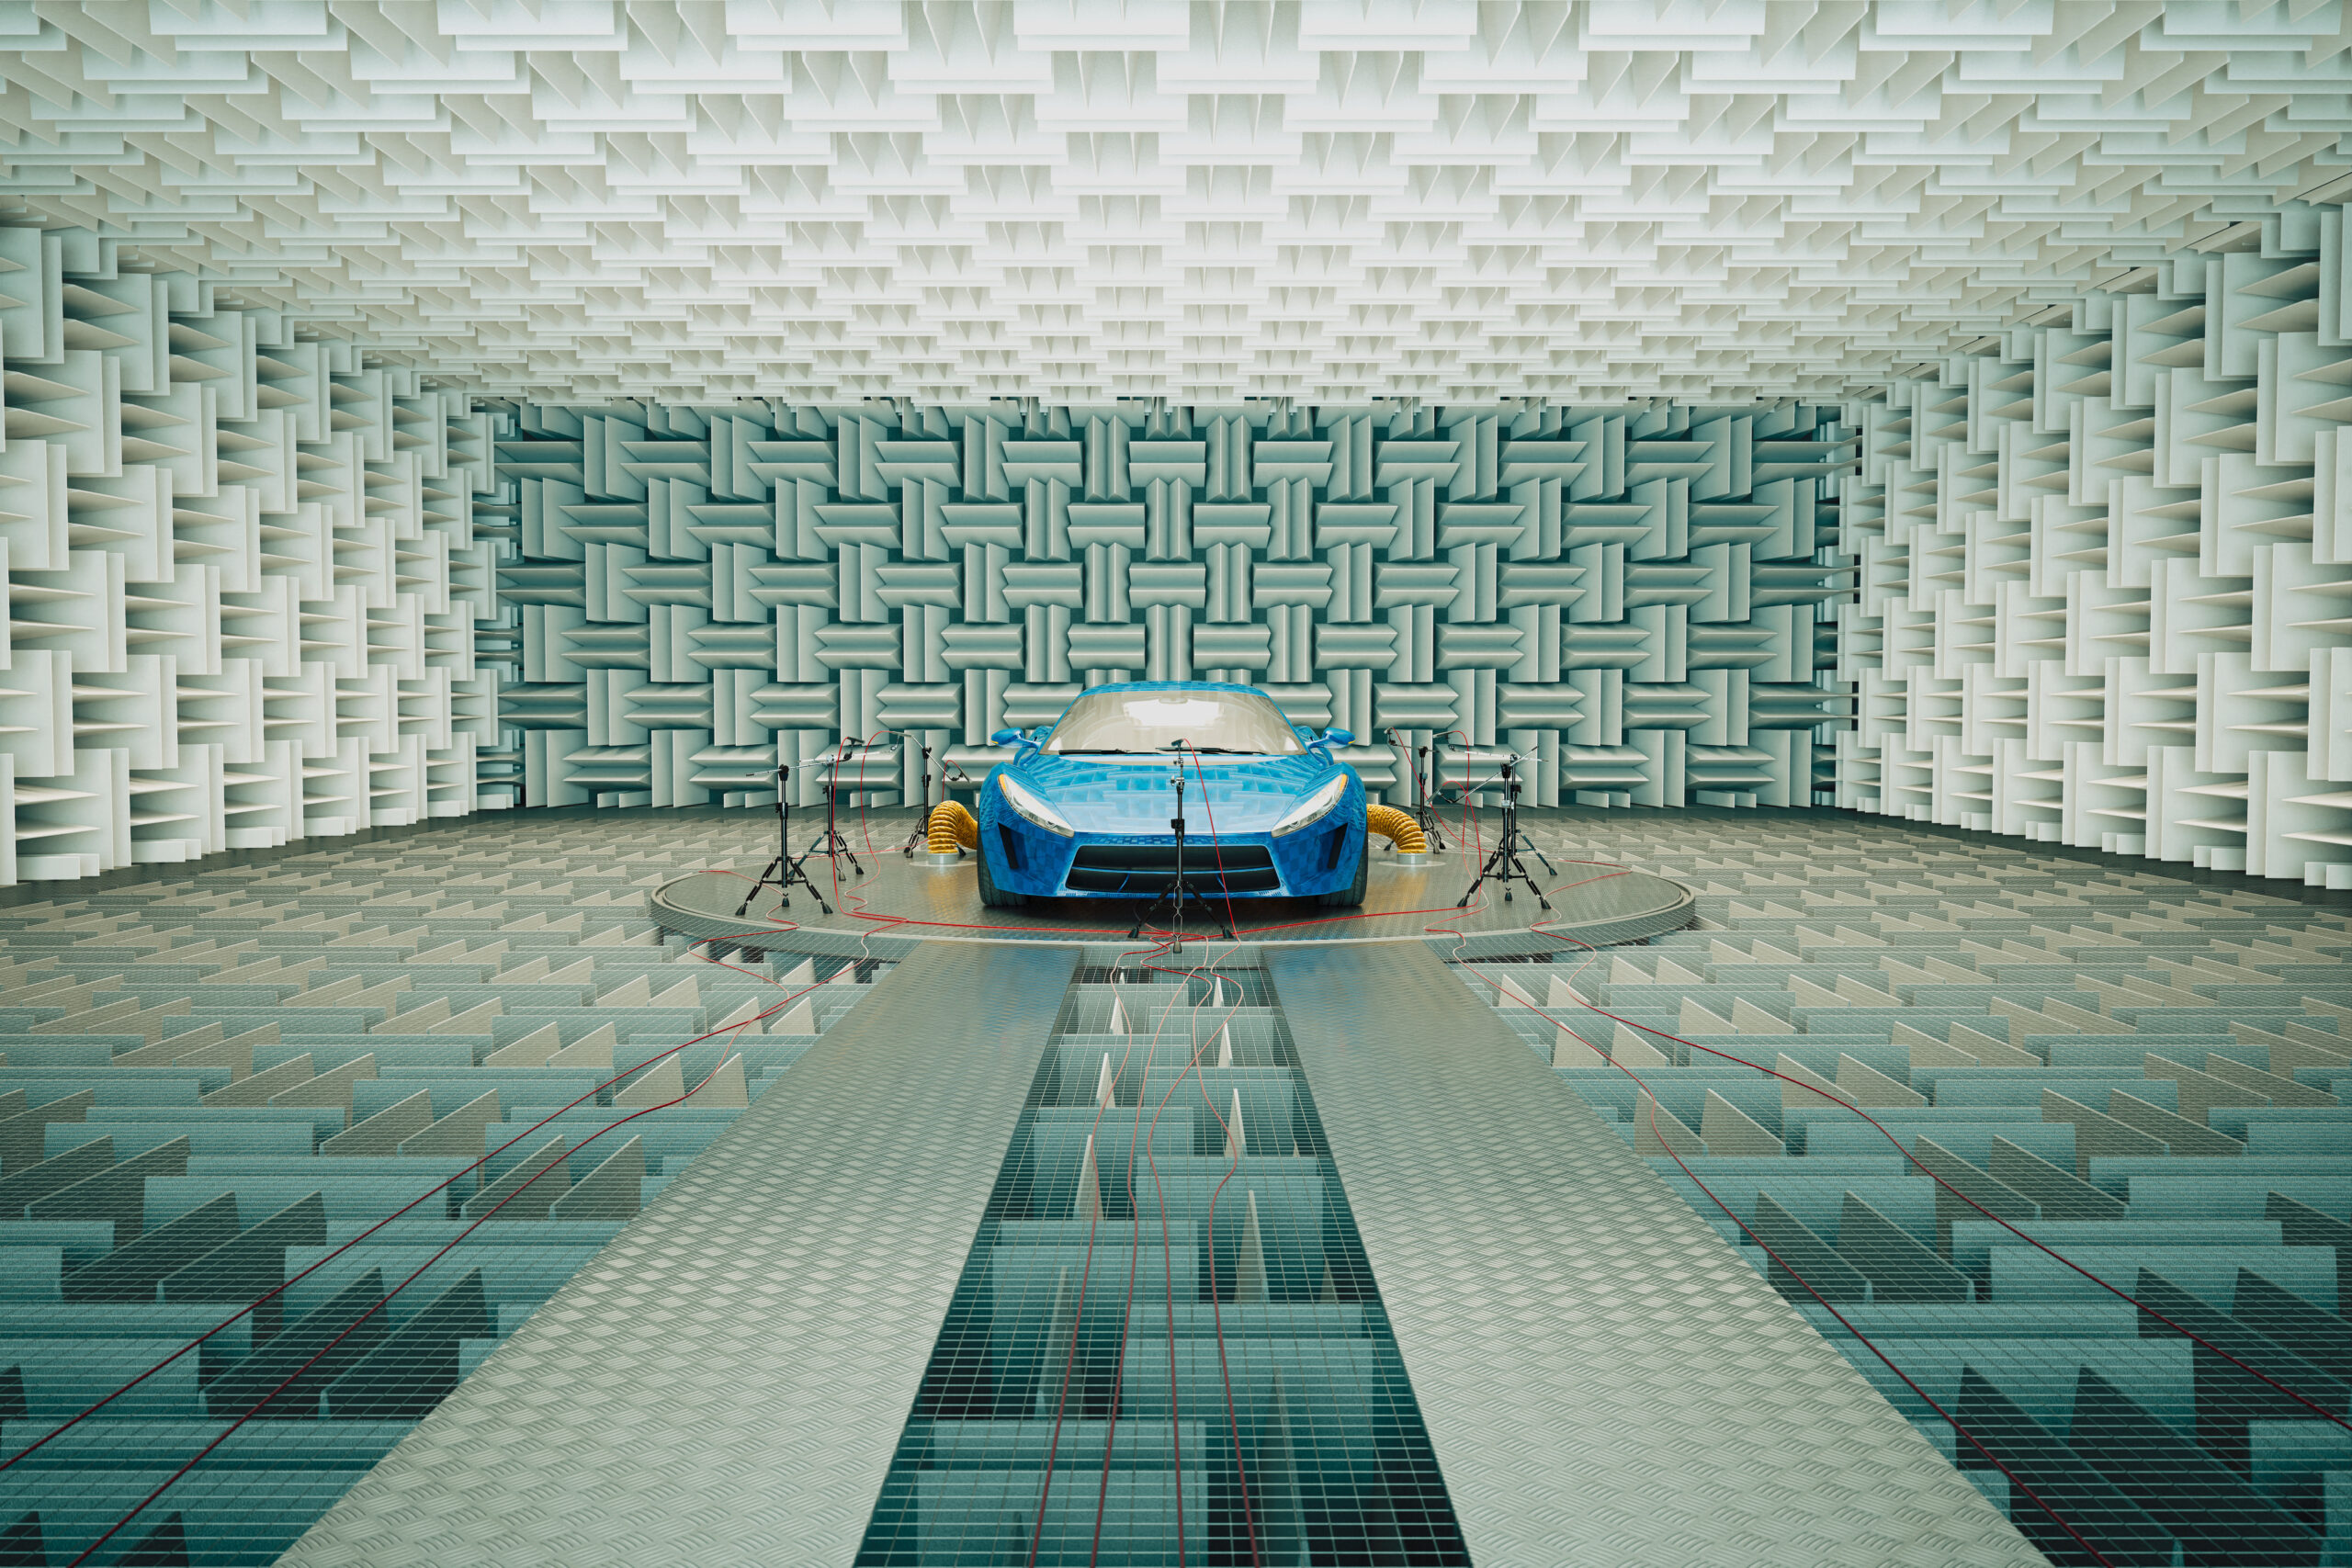 An advanced acoustic testing facility provides the backdrop for a sleek blue sports car being tested for sound dampening and performance optimization